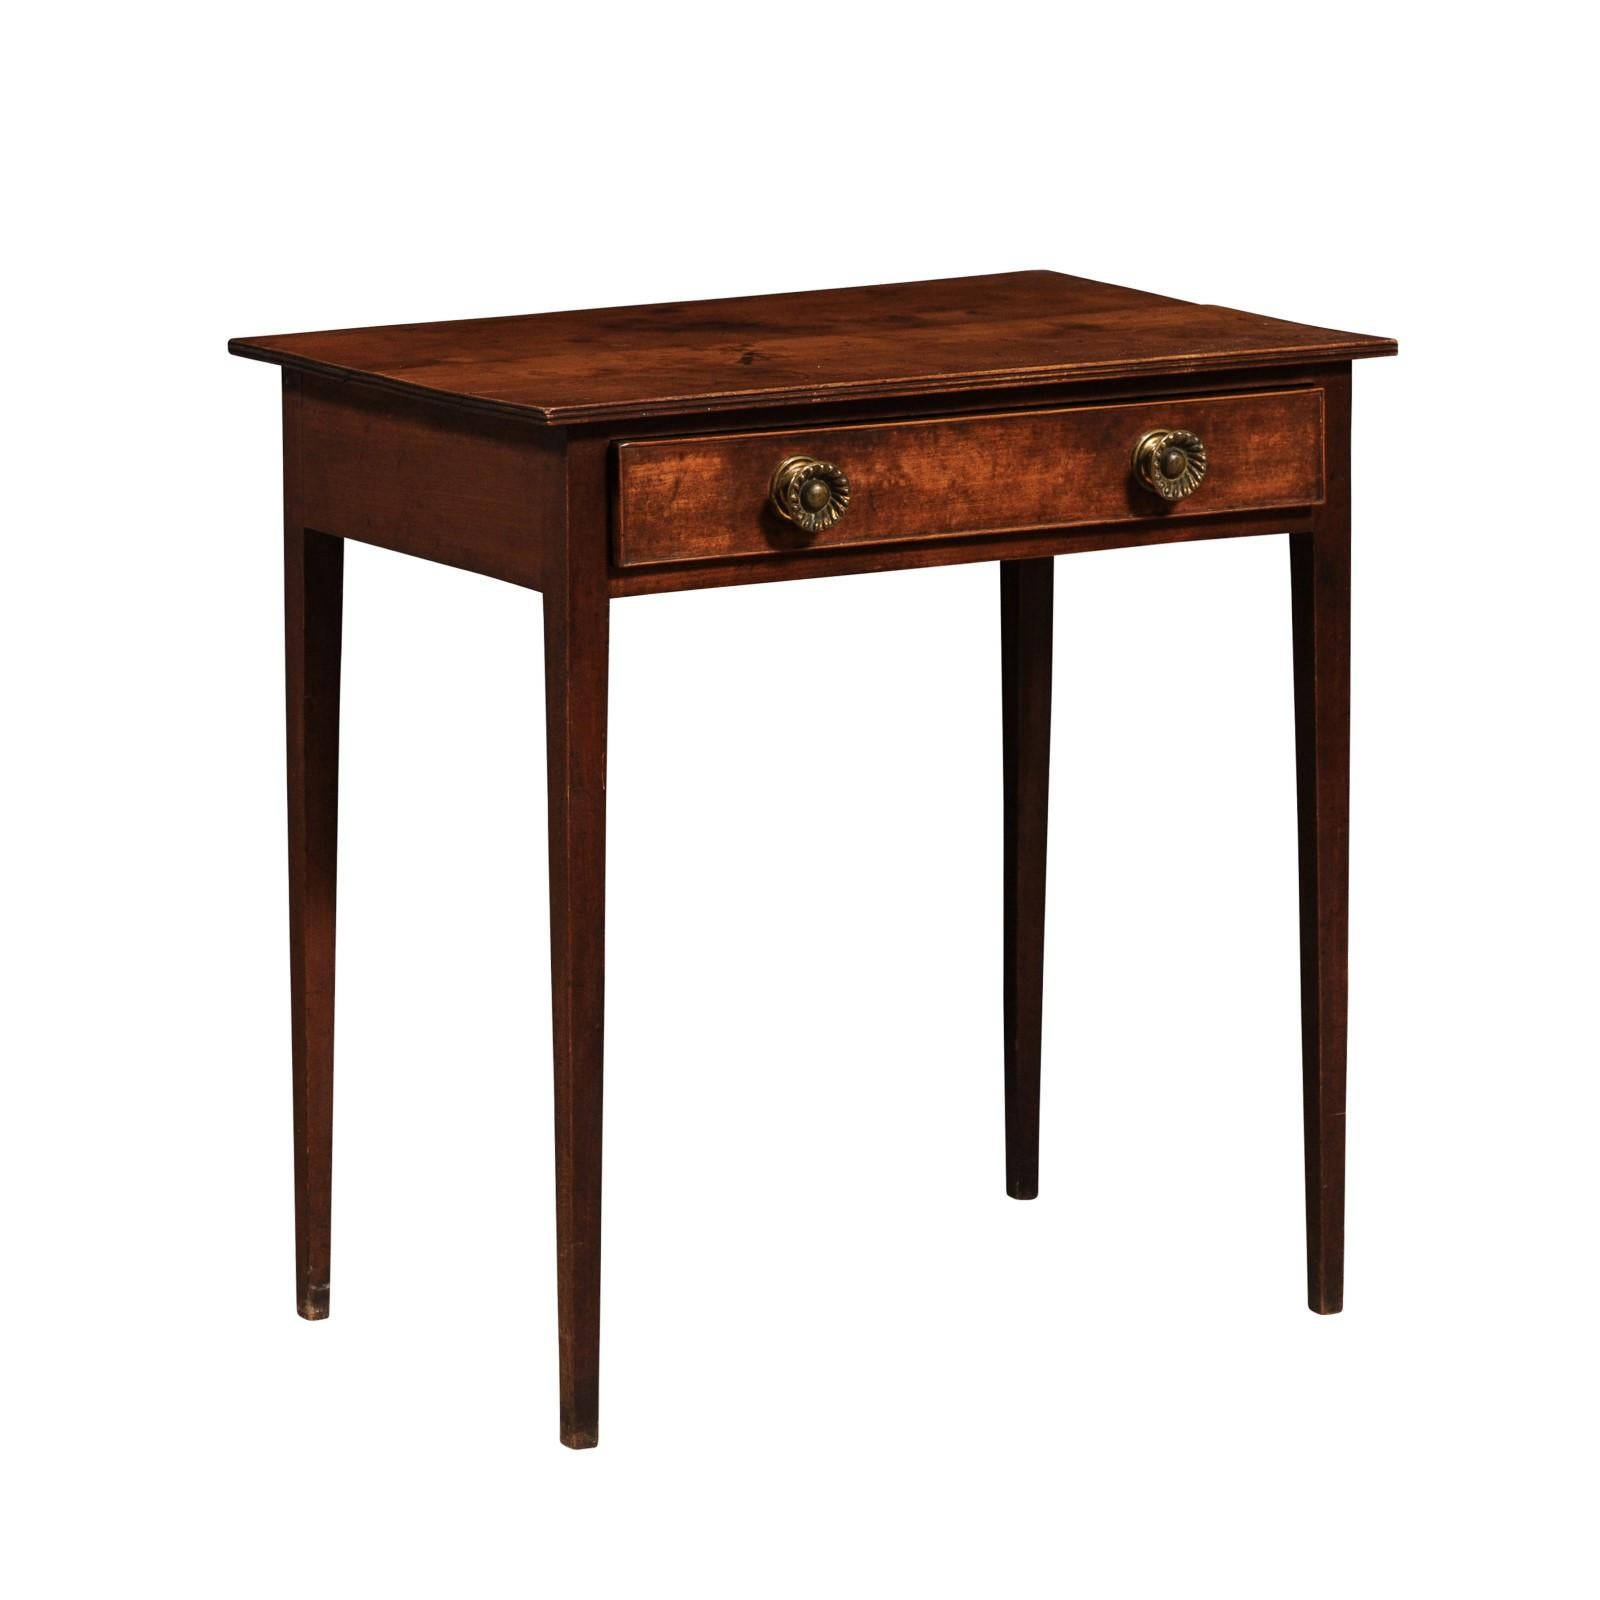 An English Georgian period fruitwood side table from the 18th century with single drawer, double edge and tapered legs. Embrace the refined simplicity and timeless appeal of this English Georgian period fruitwood side table from the 18th century.